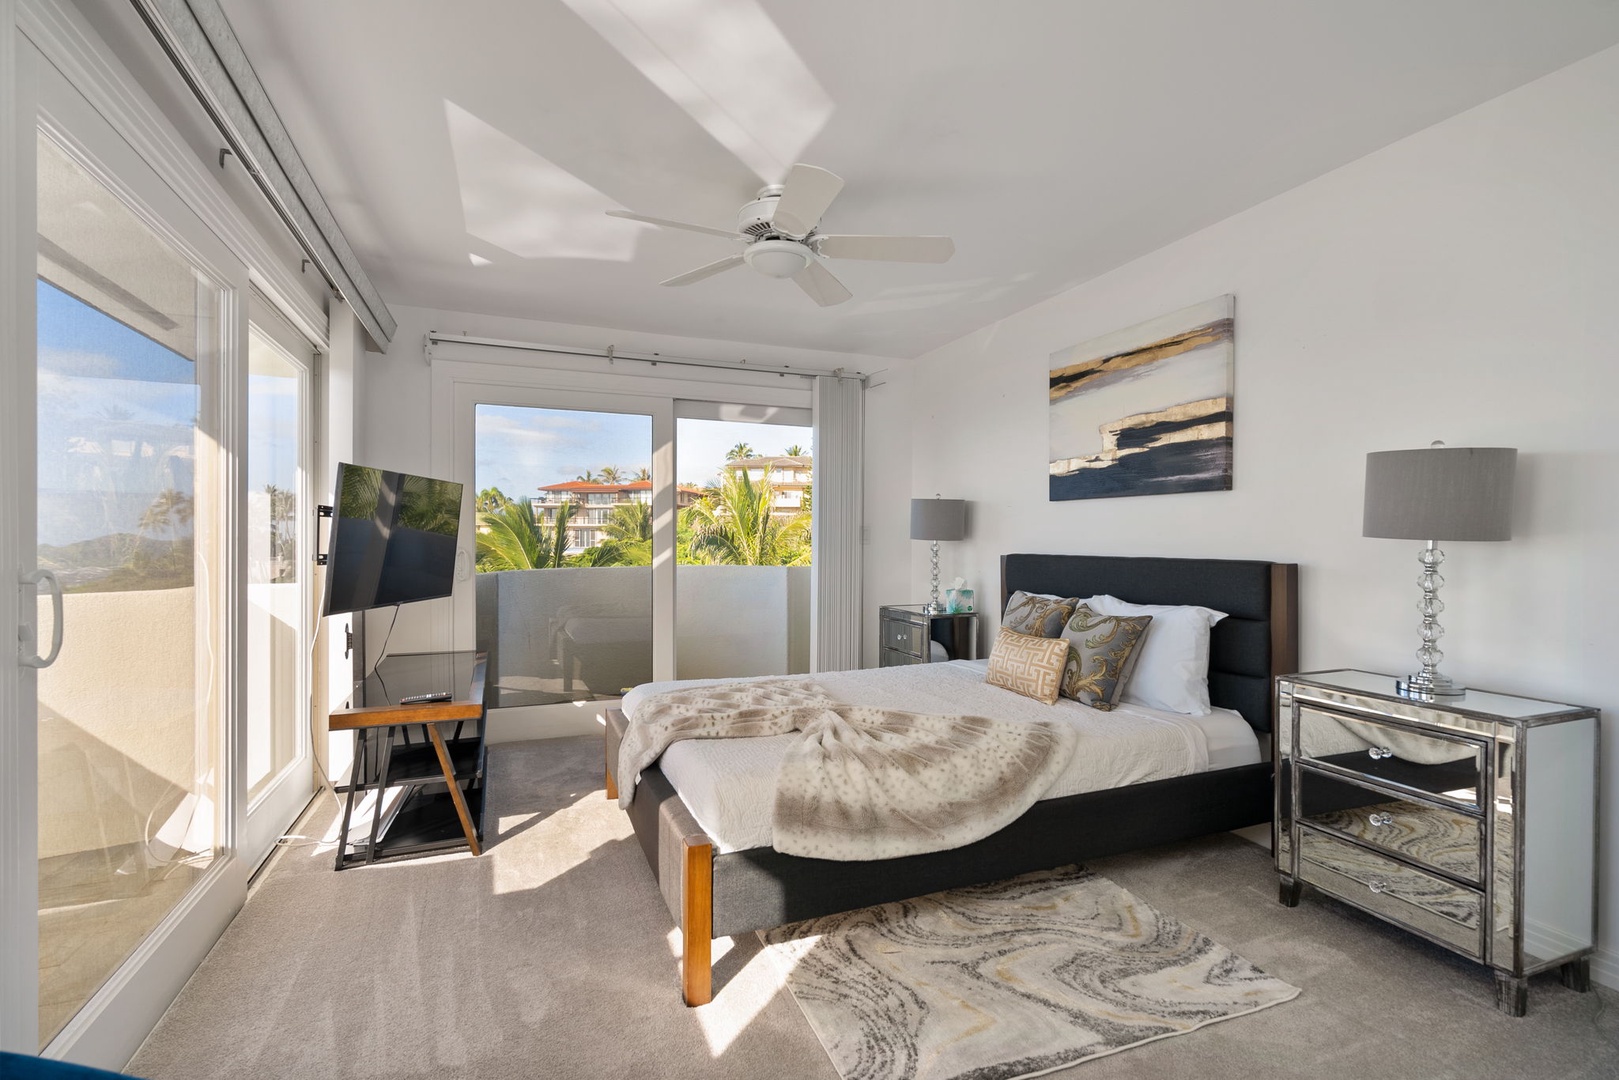 Honolulu Vacation Rentals, Hawaii Ridge Getaway - Bright and airy guest bedroom with glass sliders leading to private lanai.